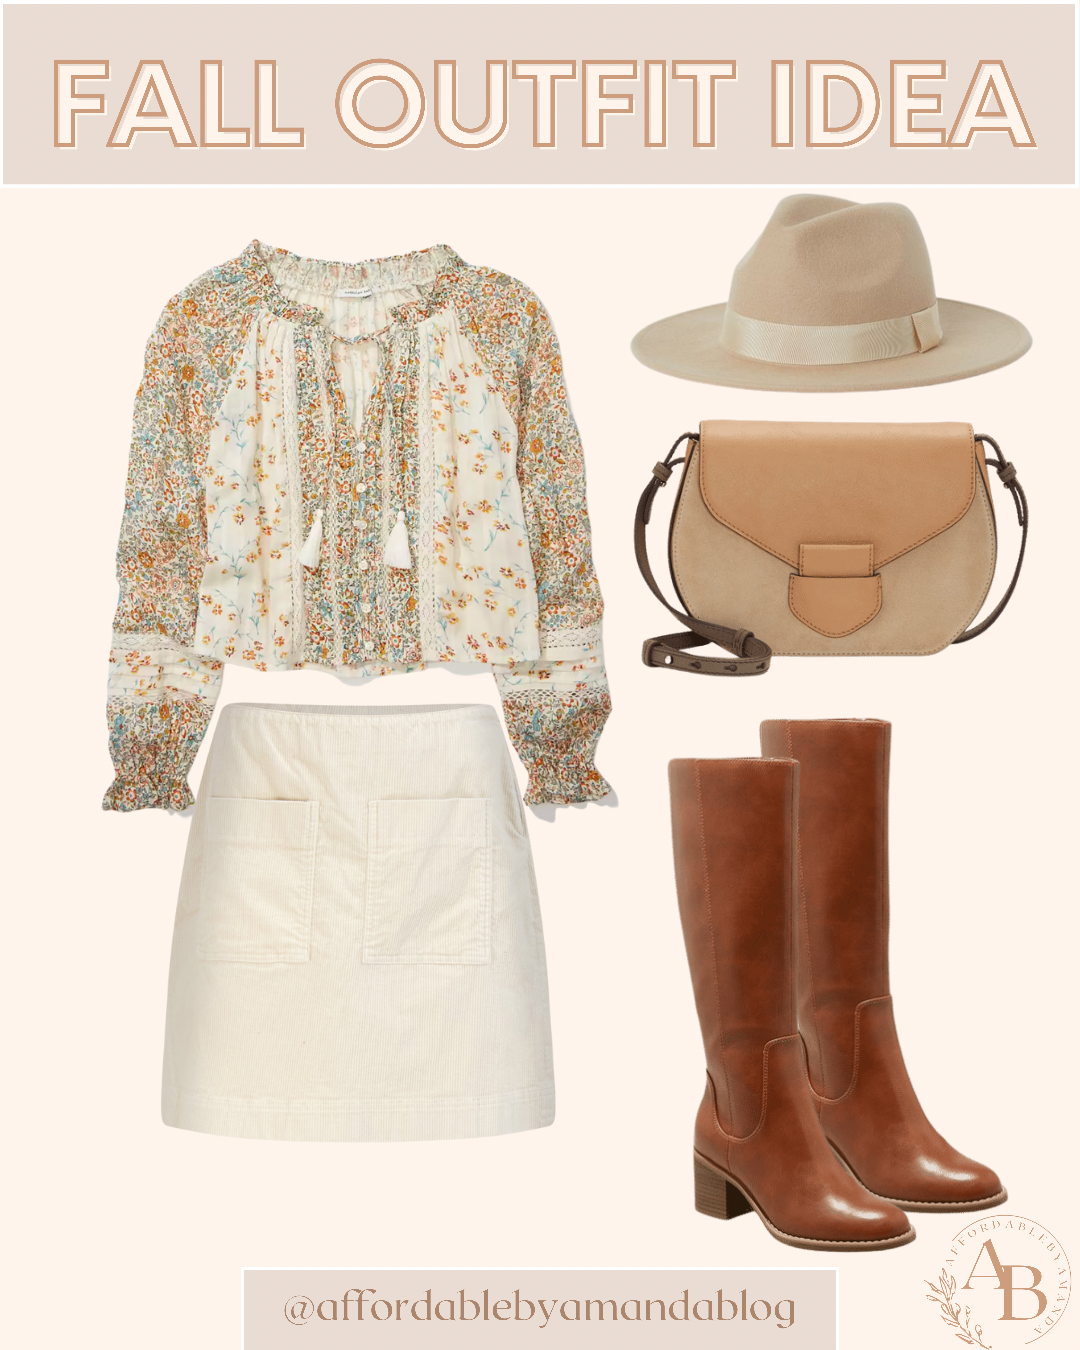 Fall Outfit Idea - Affordable by Amanda